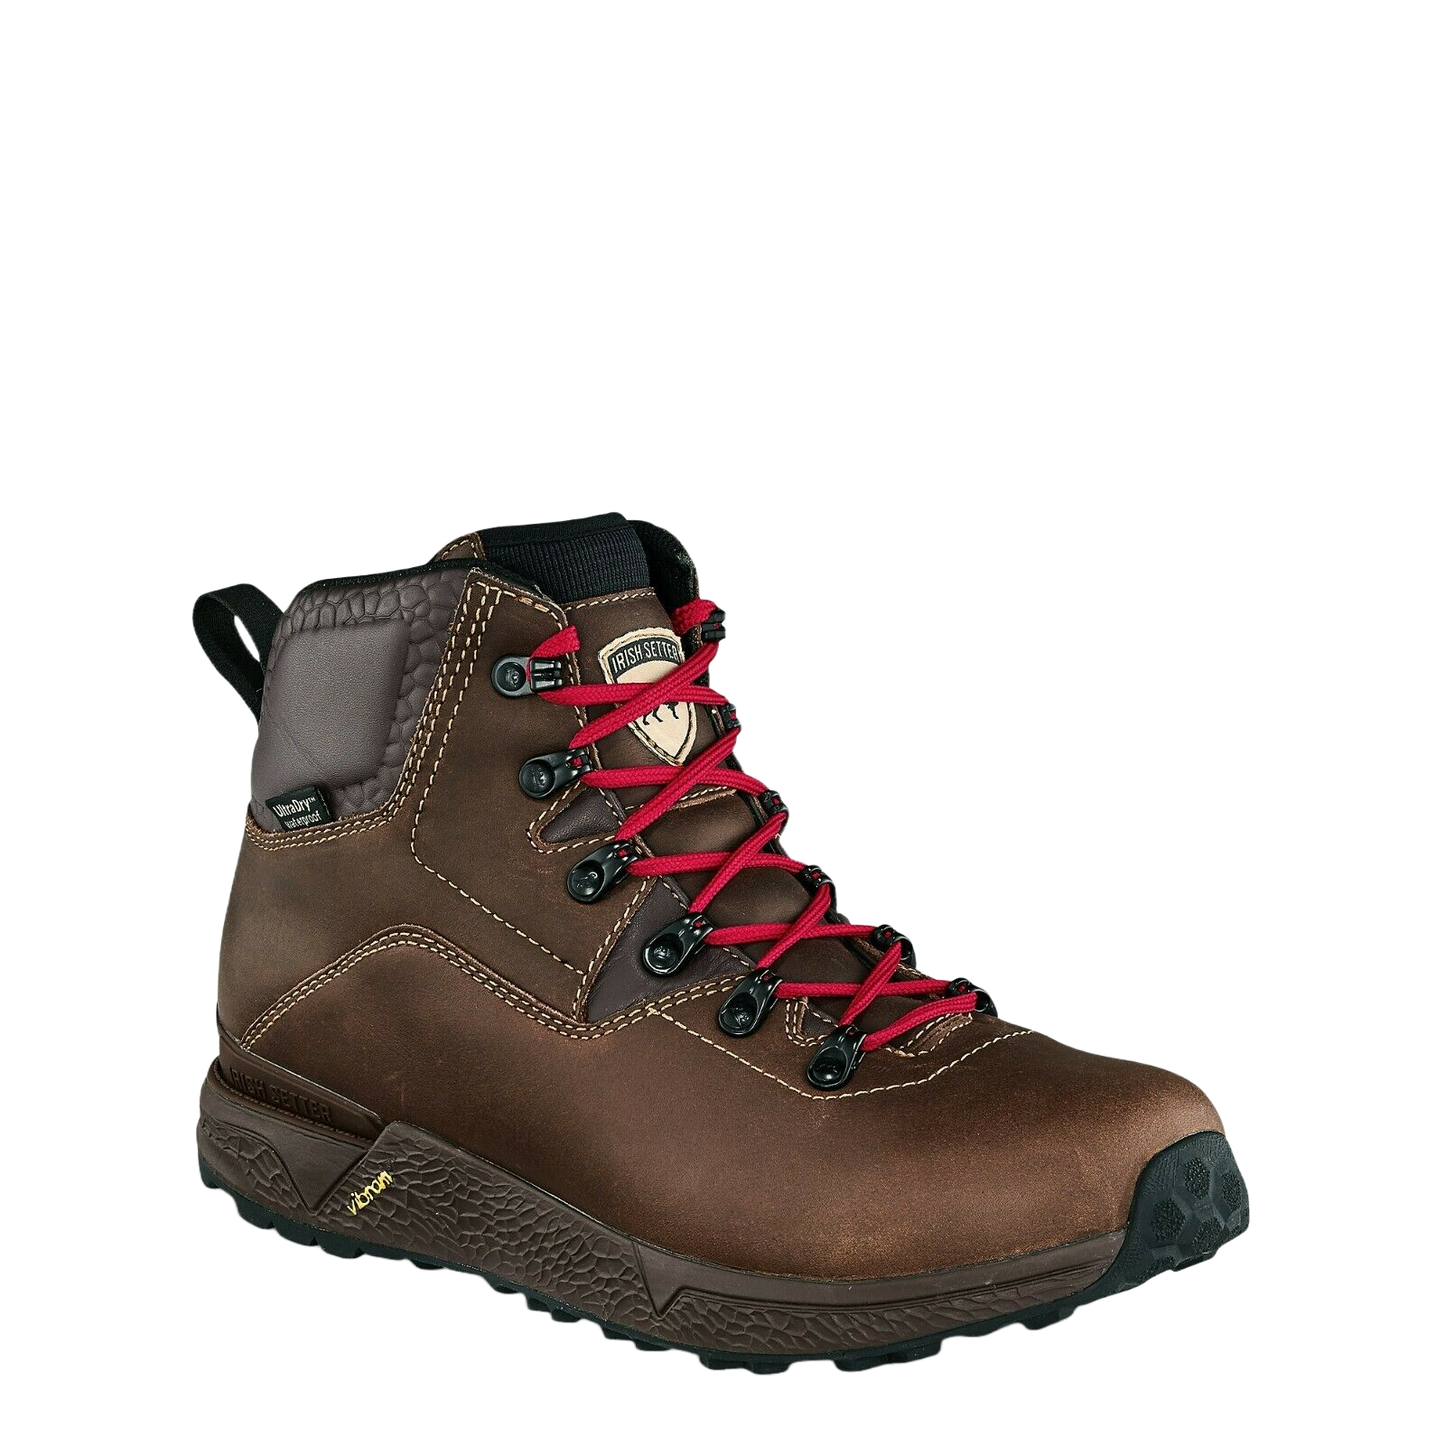 Irish Setter by Red Wing Men's Canyons 7" Waterproof Hiking Boots 2857